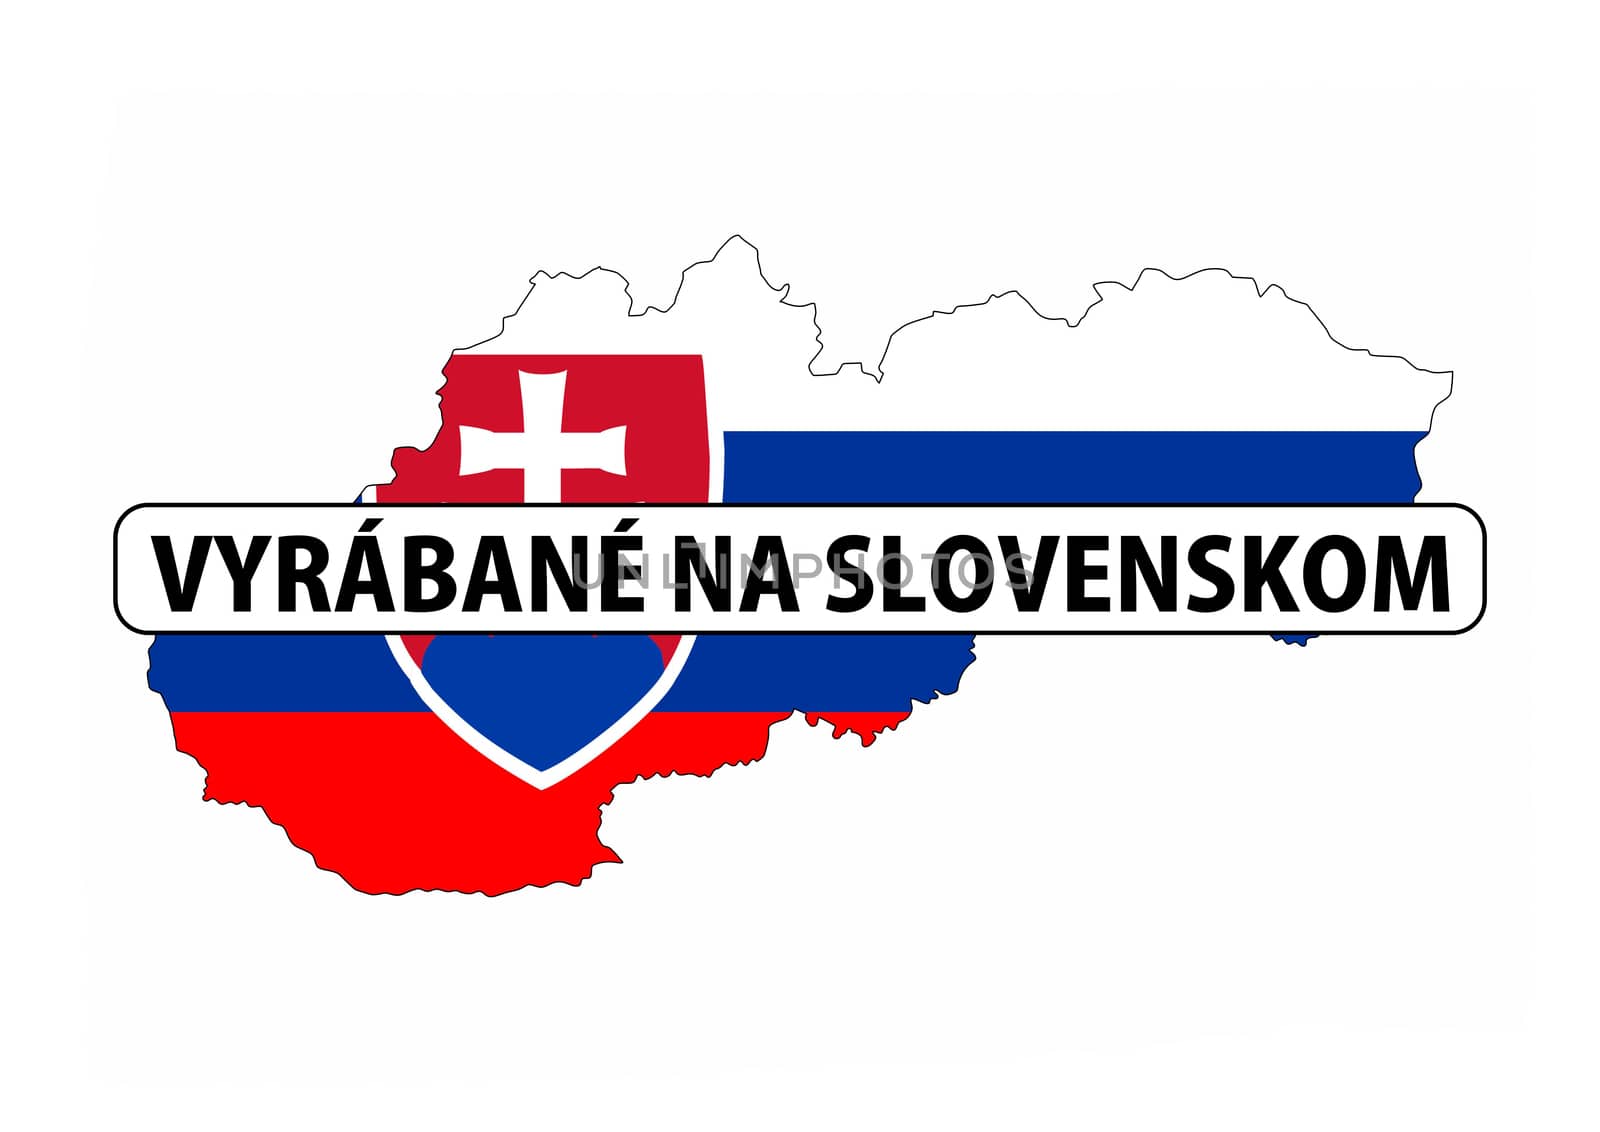 made in slovakia country national flag map shape with text